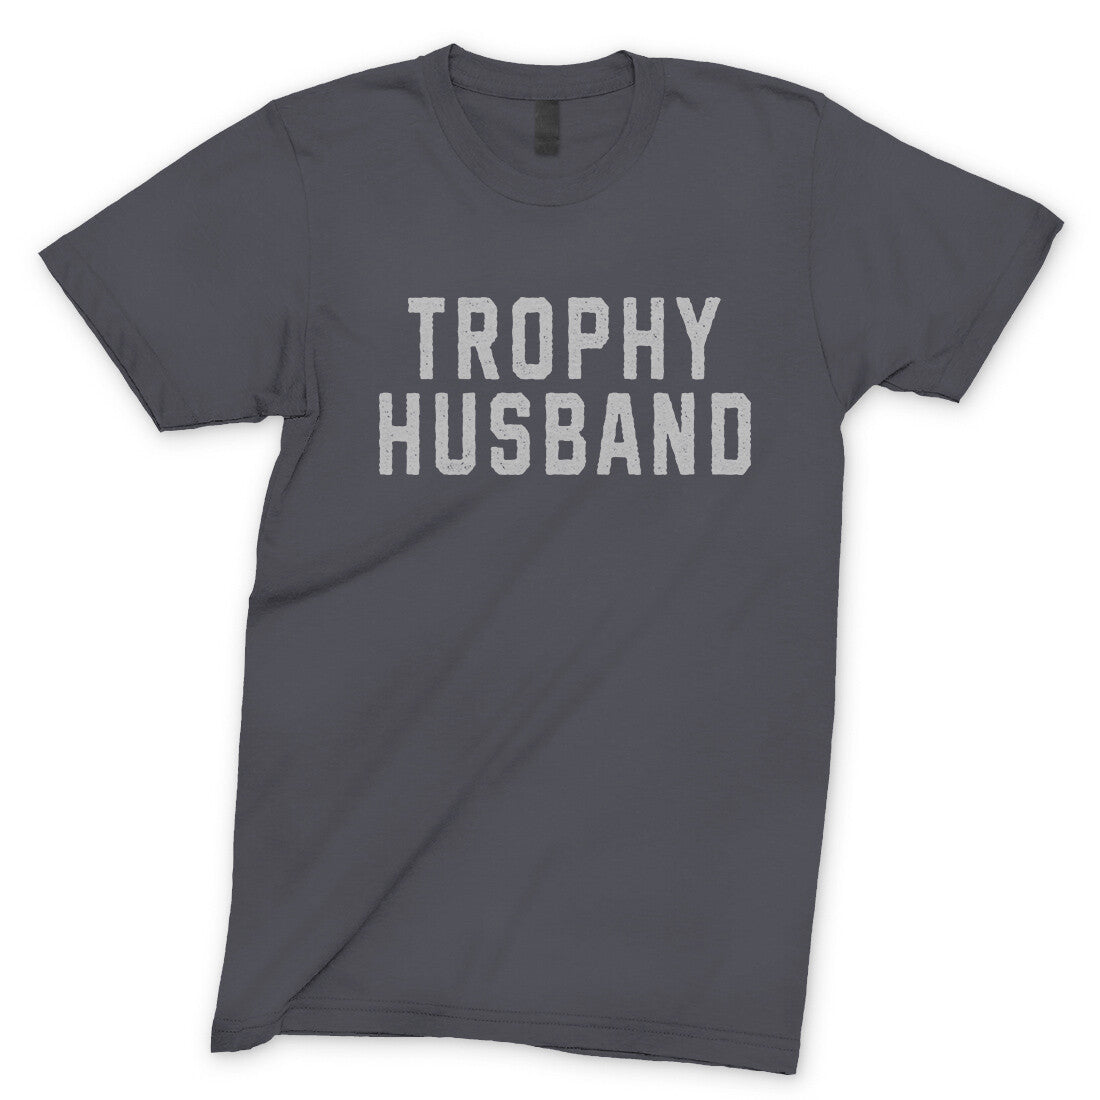 Trophy Husband in Charcoal Color